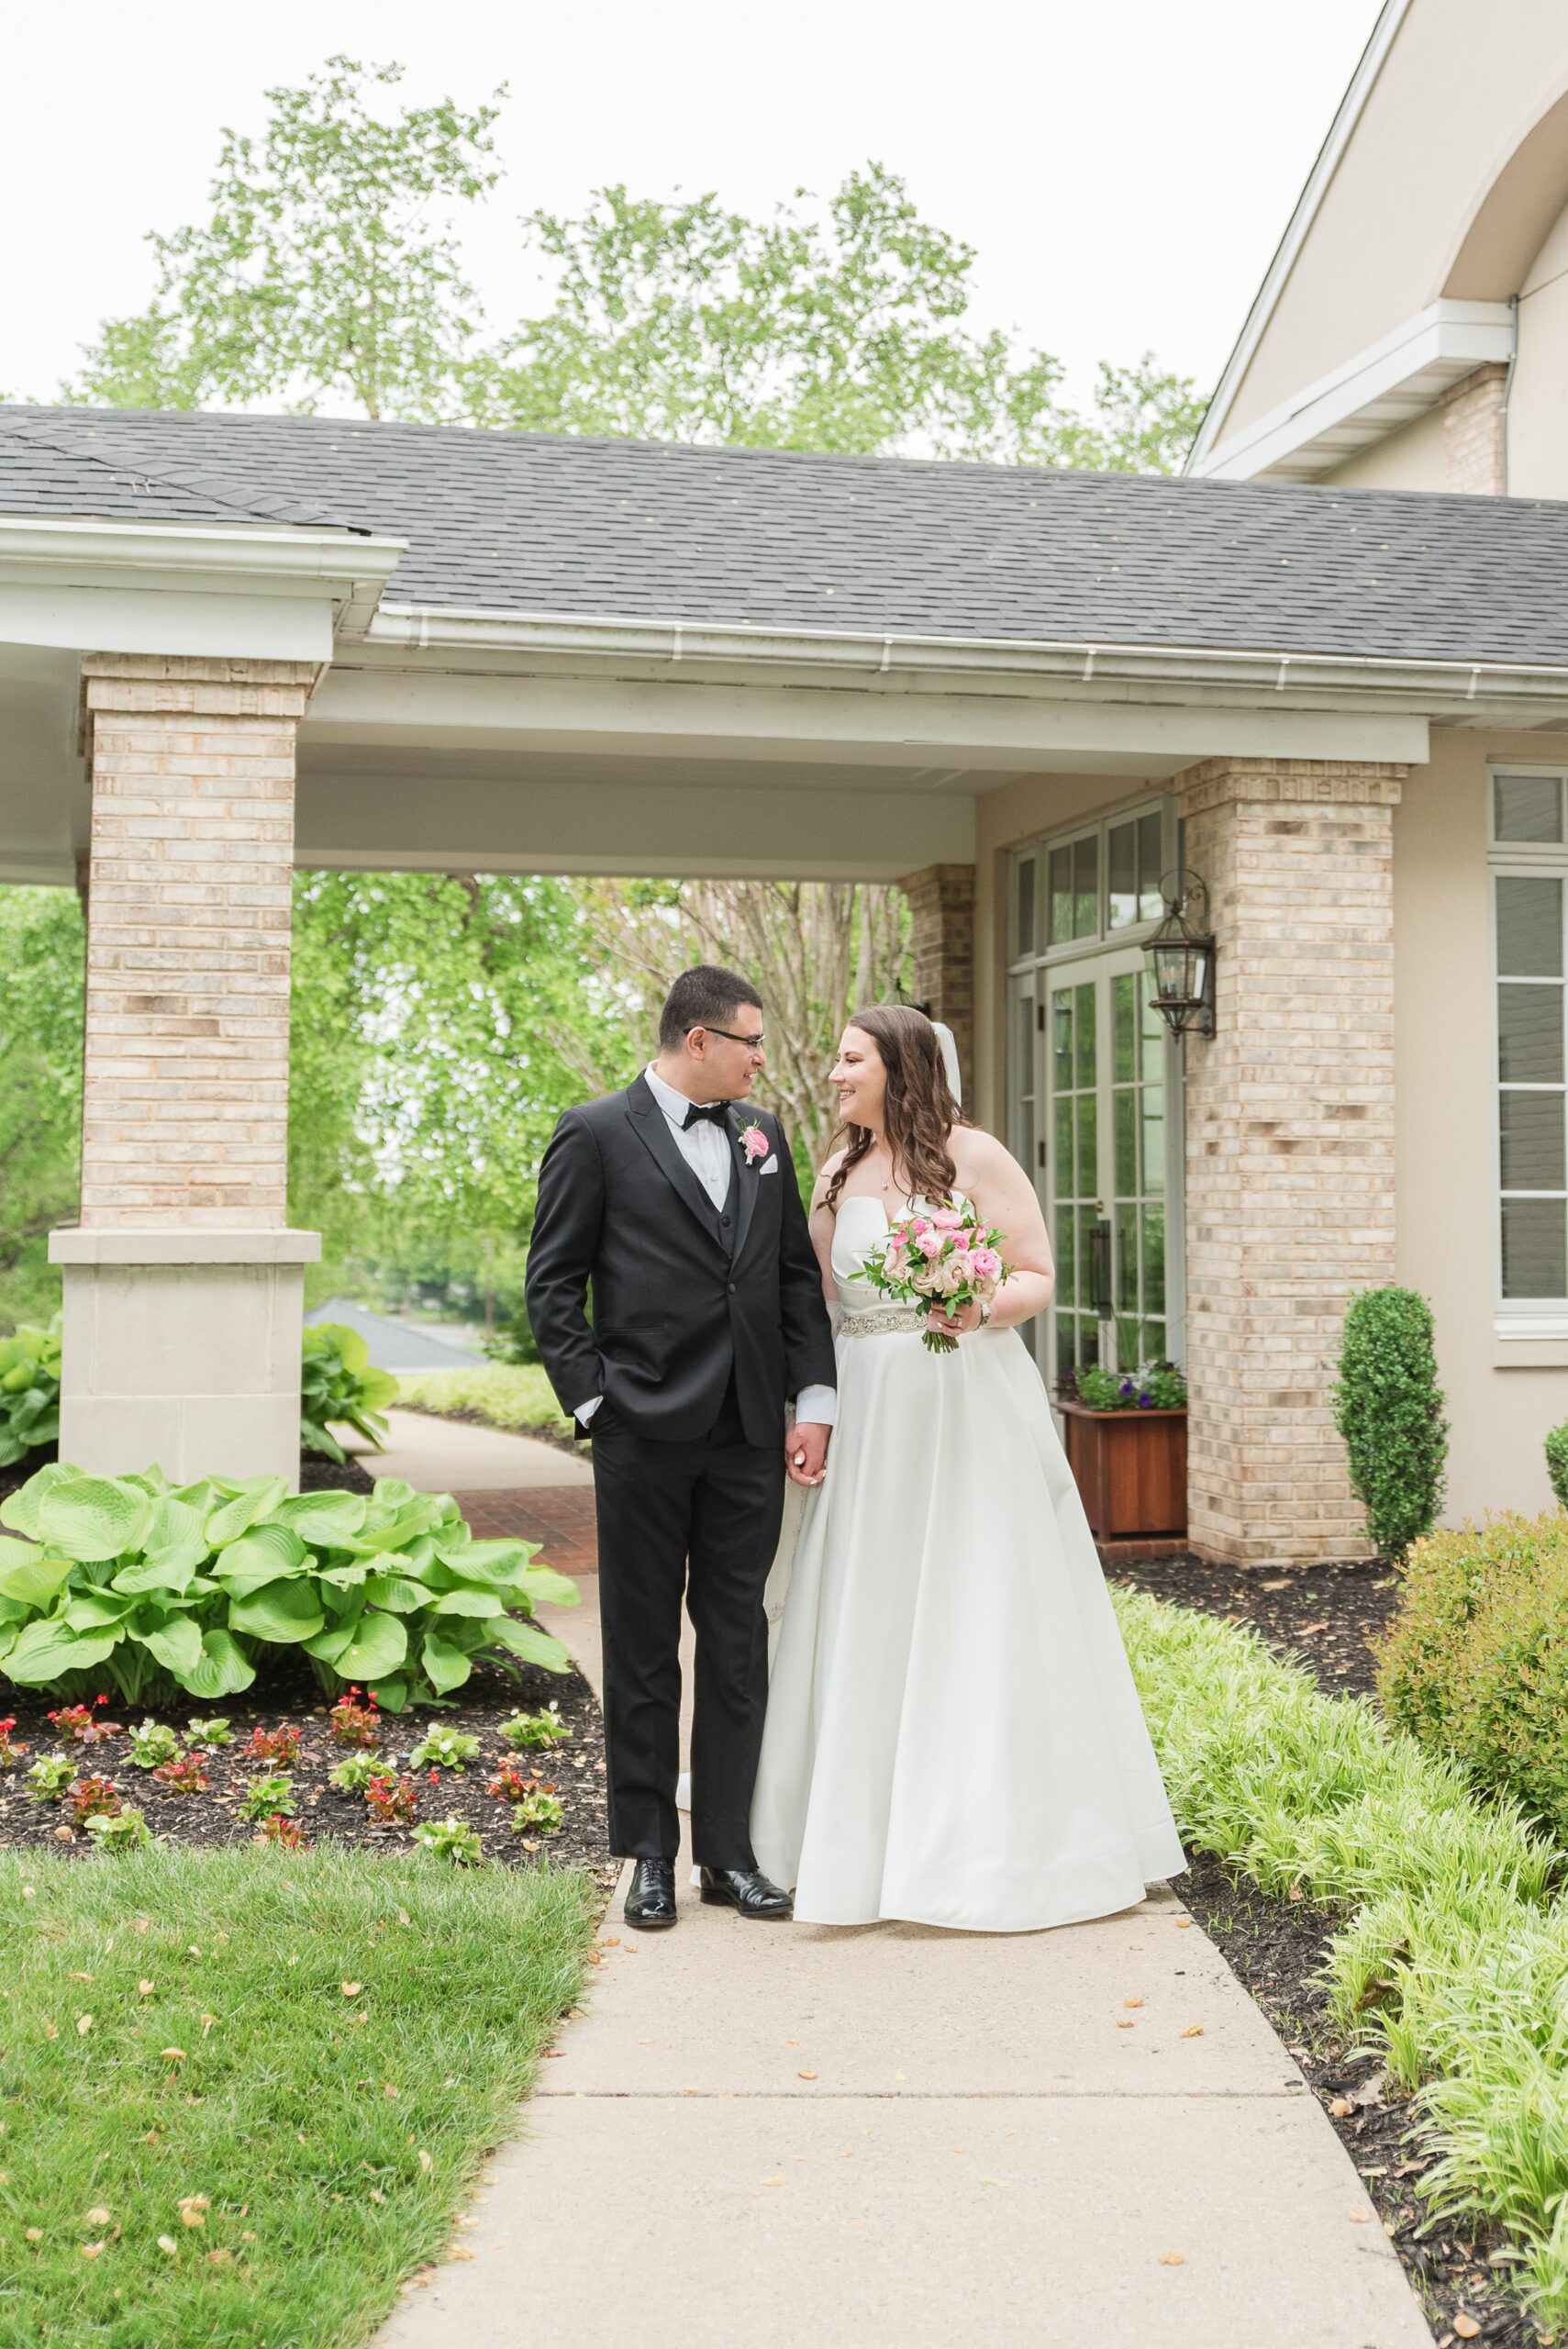 Newlyweds smile at each other while walking down a garden sidewalk